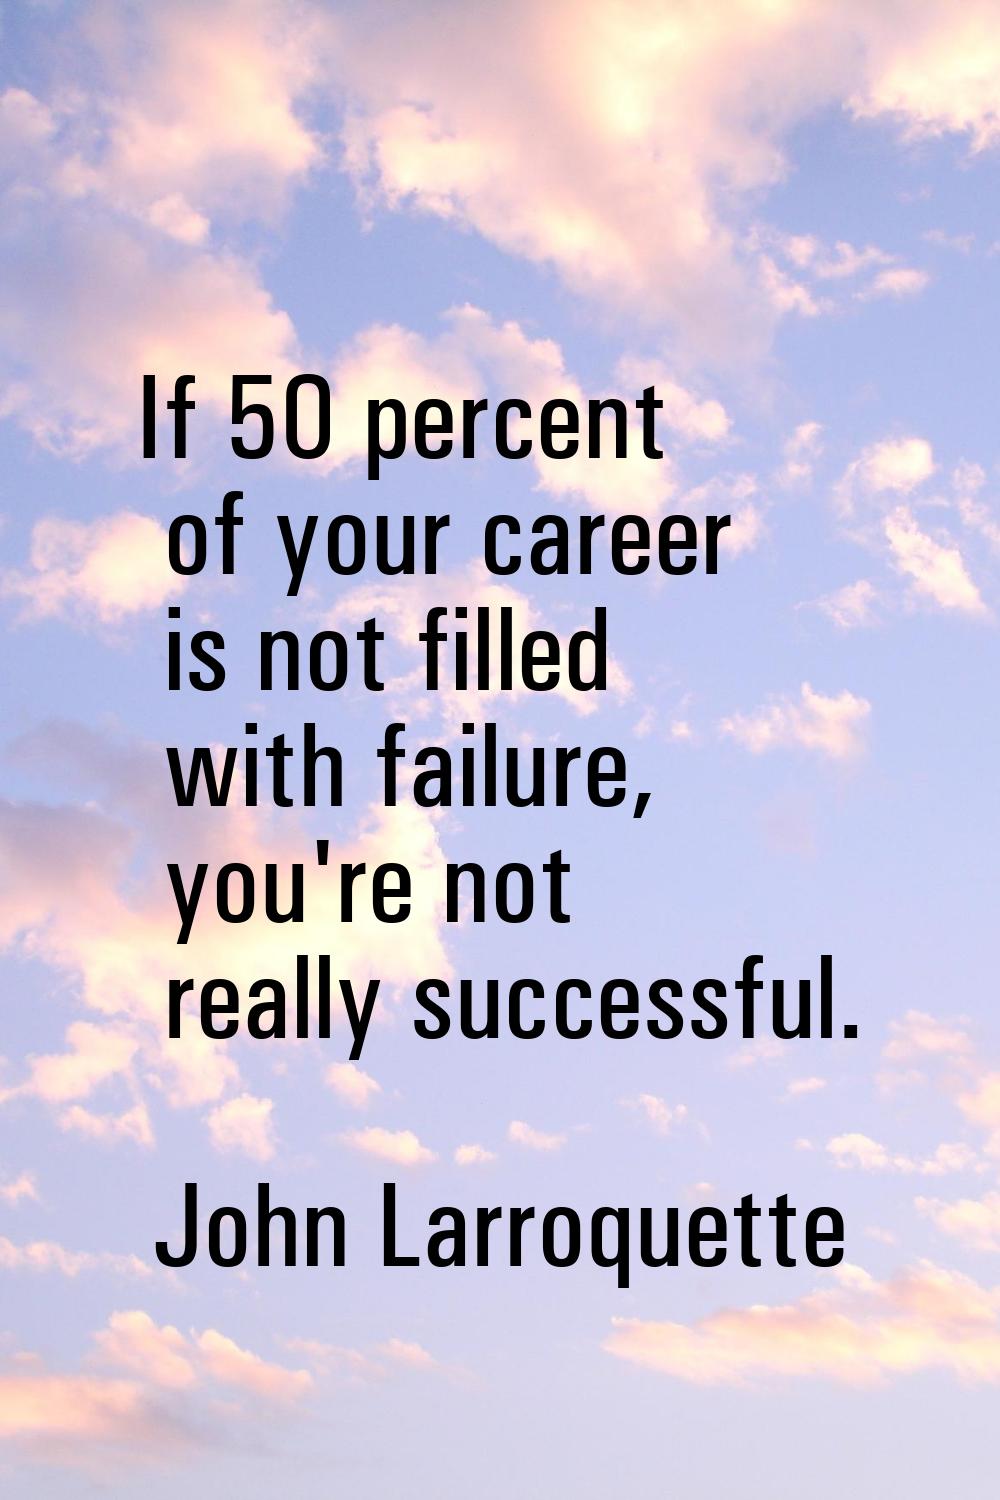 If 50 percent of your career is not filled with failure, you're not really successful.